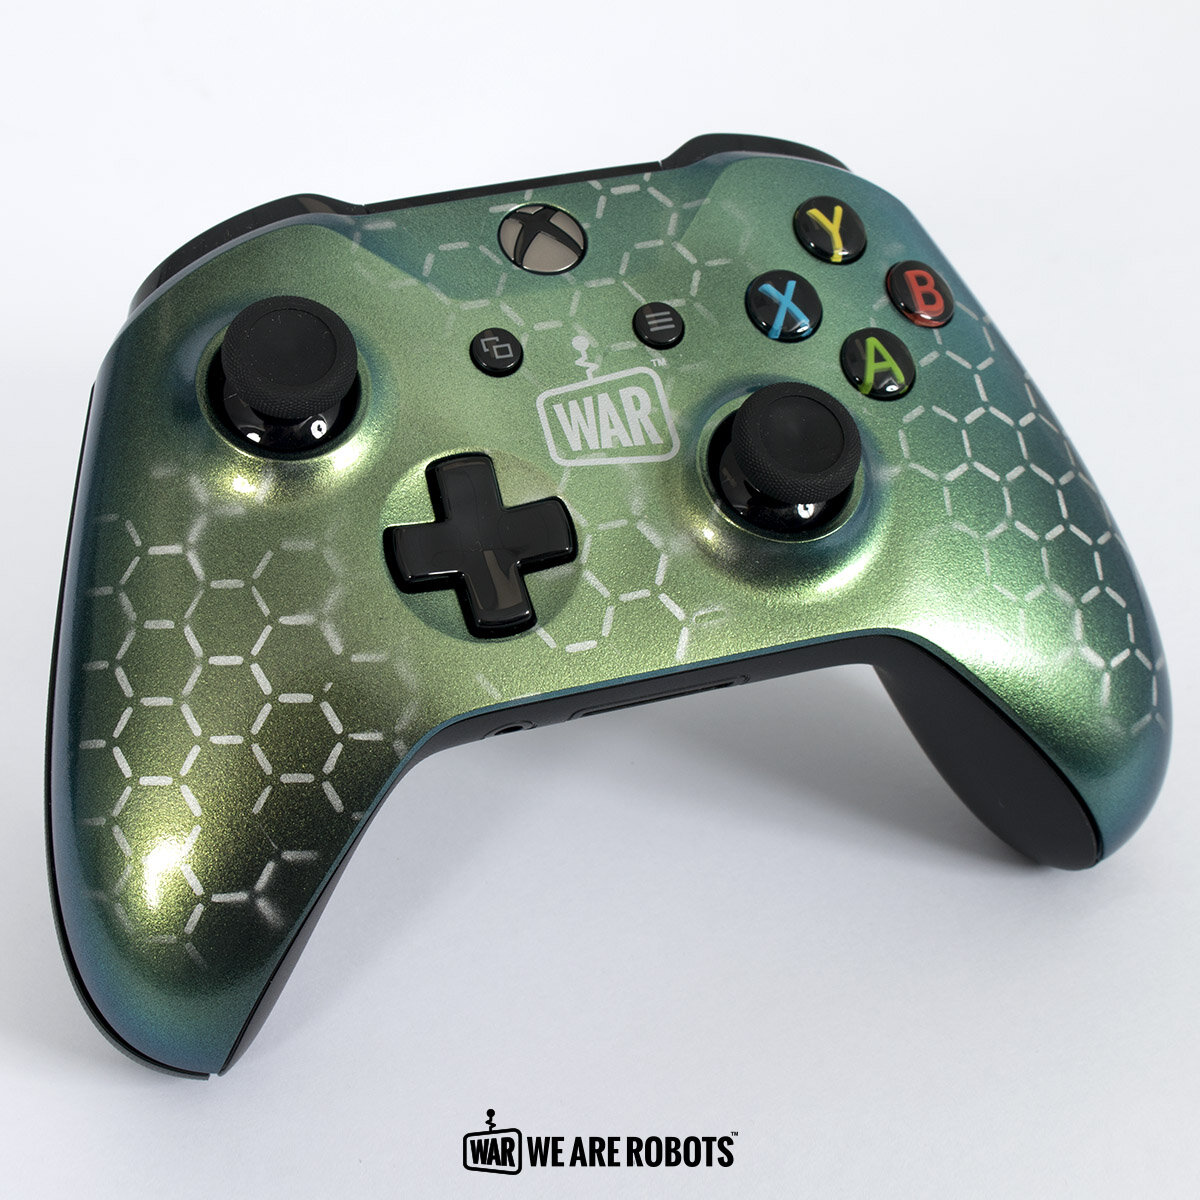 We Are Robots - Xbox One Controller